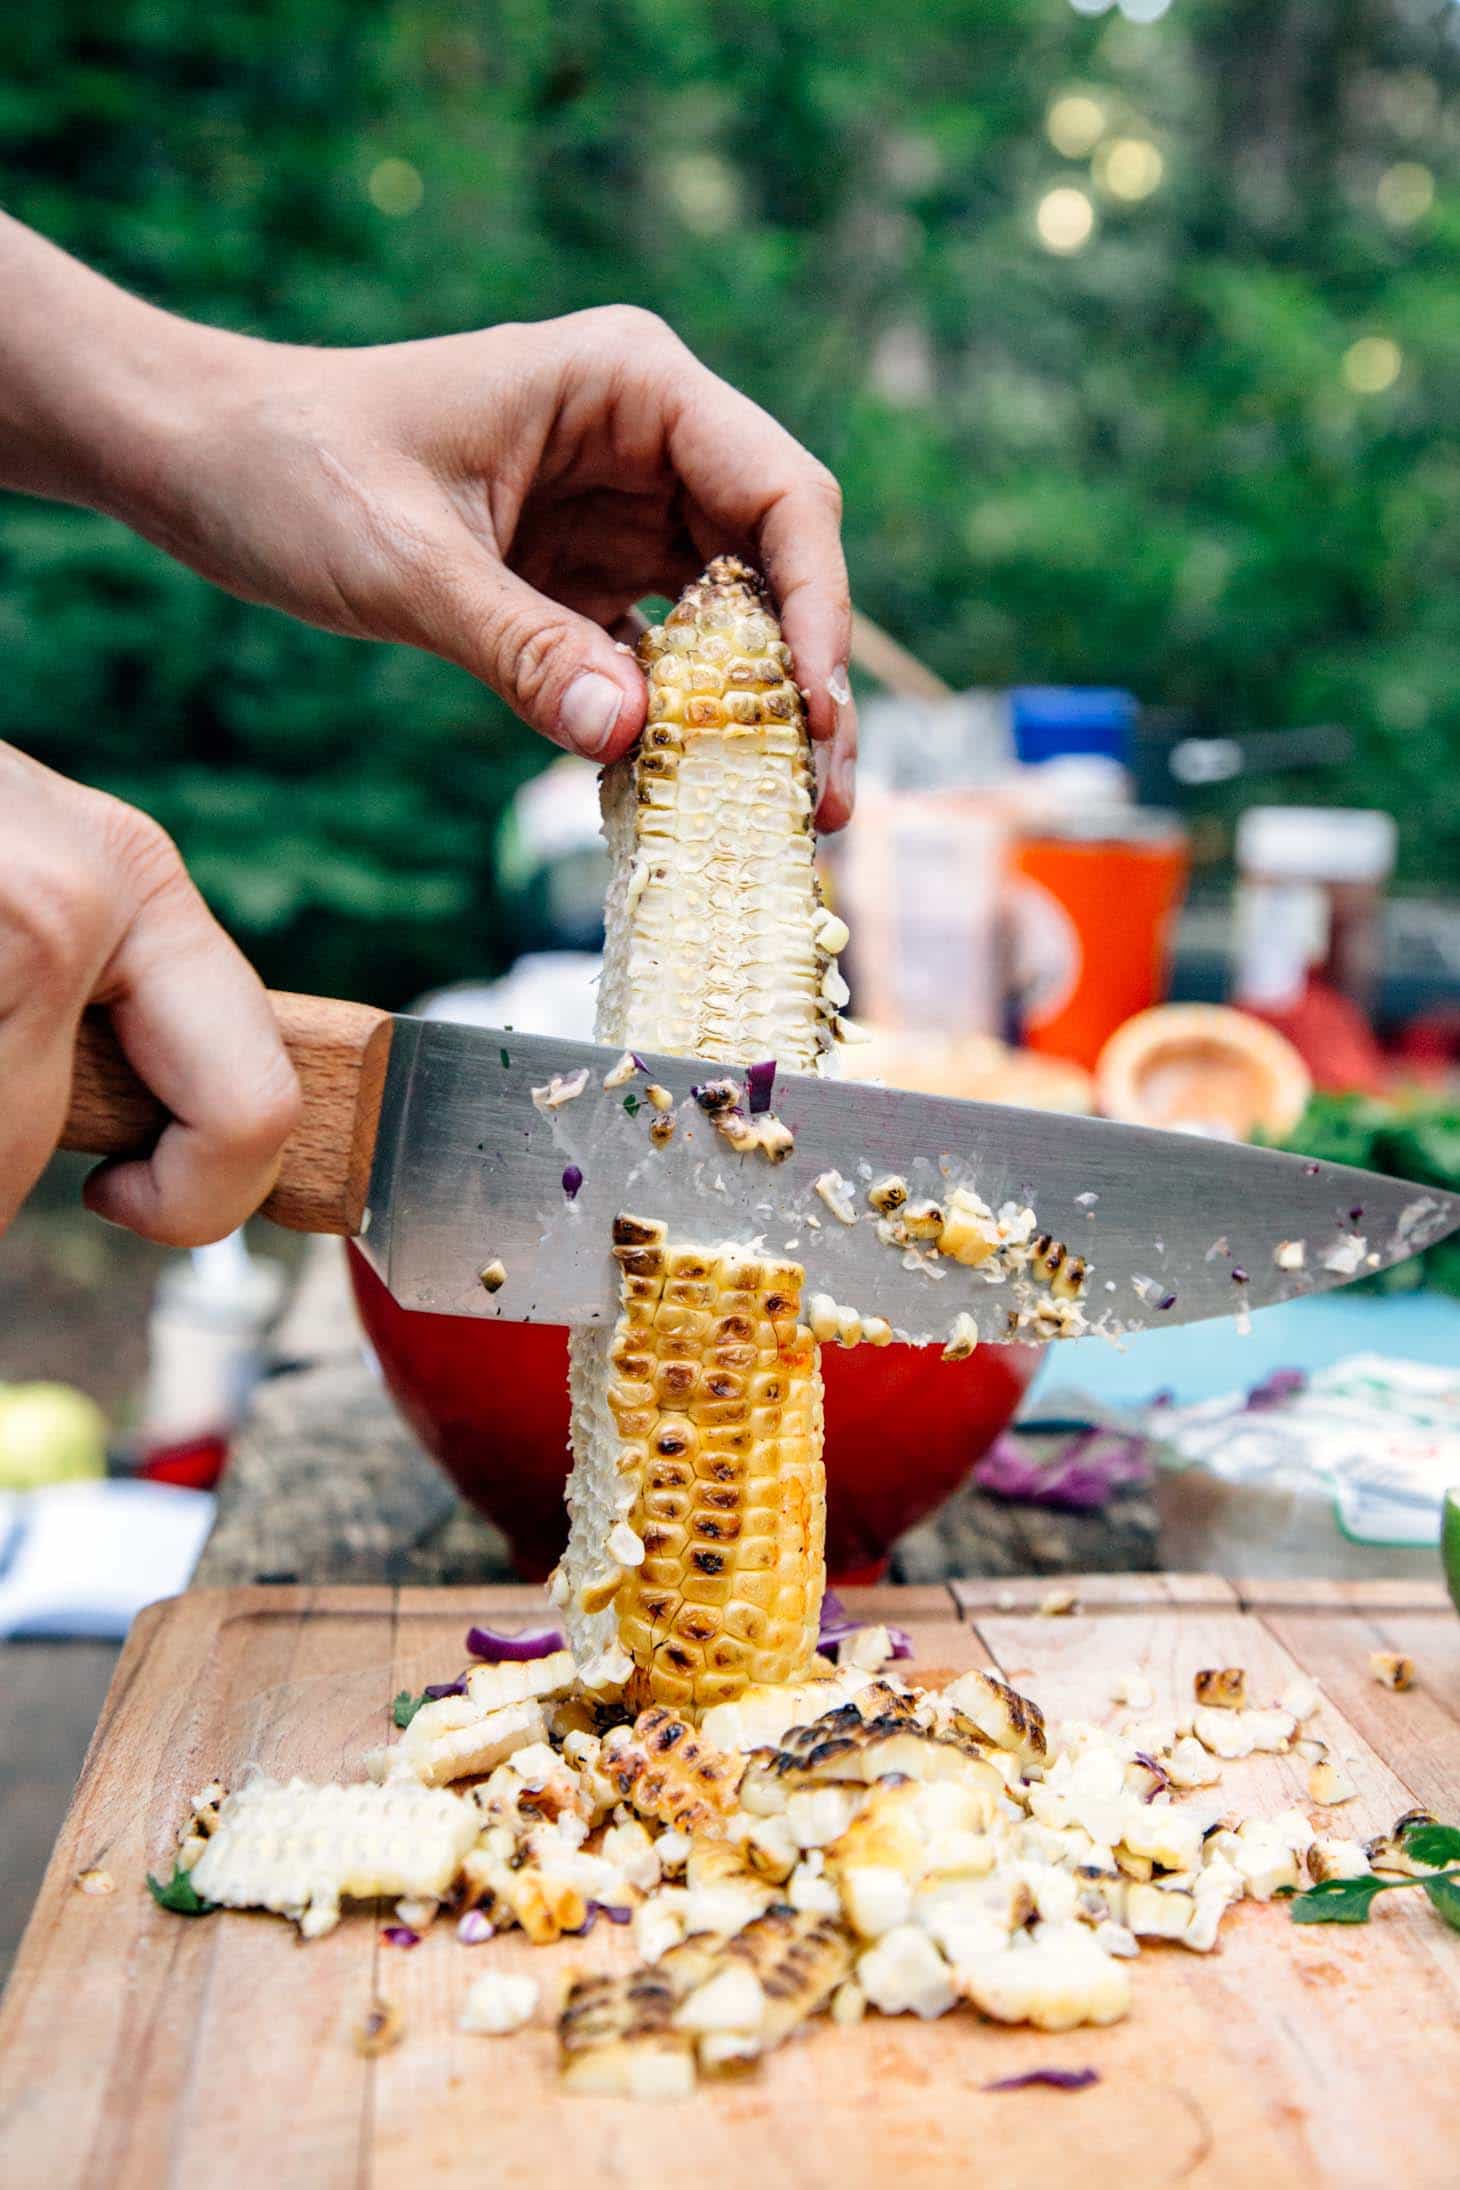 A fun take on Mexican street corn, this grilled esquites recipe (Mexican coleslaw) is a great side to serve with dinner while camping!